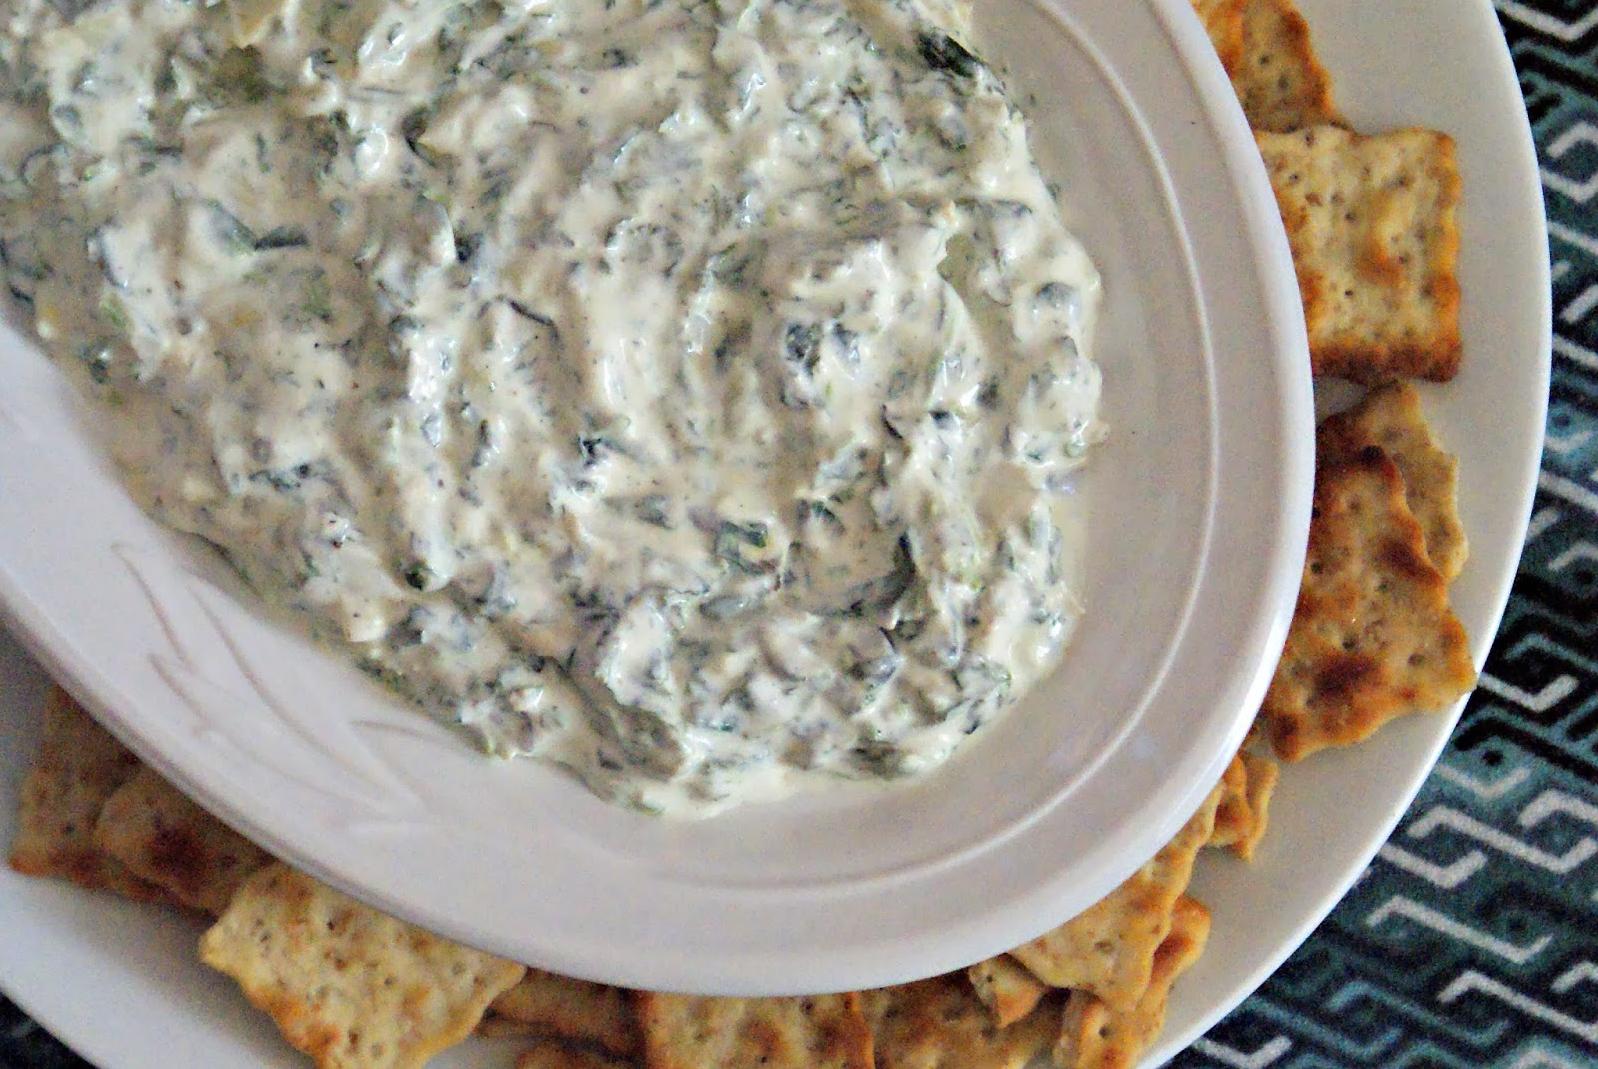  It's the perfect appetizer for any party or gathering.